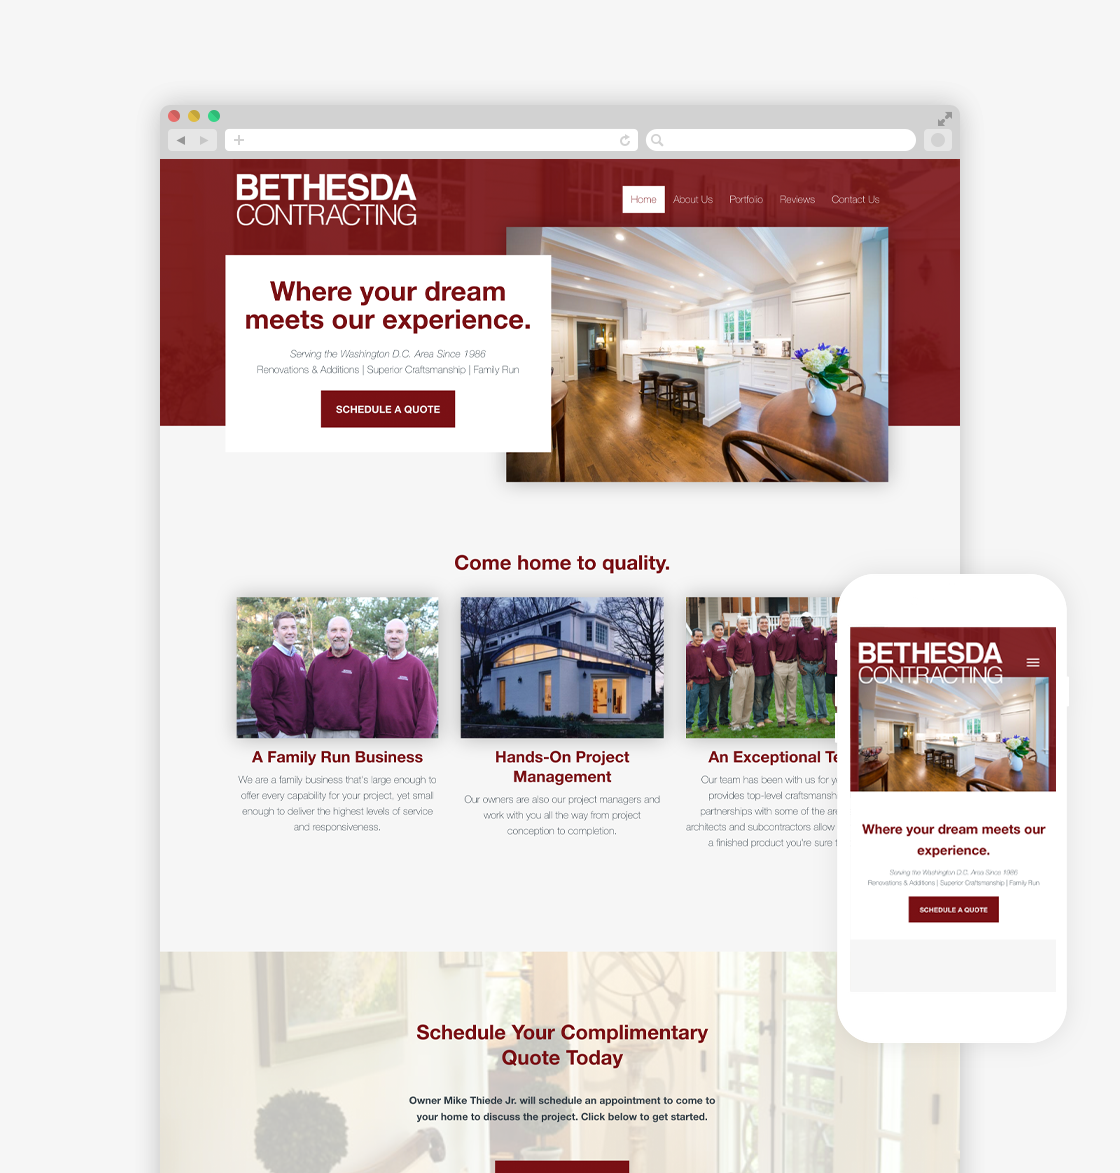 Bethesda Contracting website by Sara Chandlee